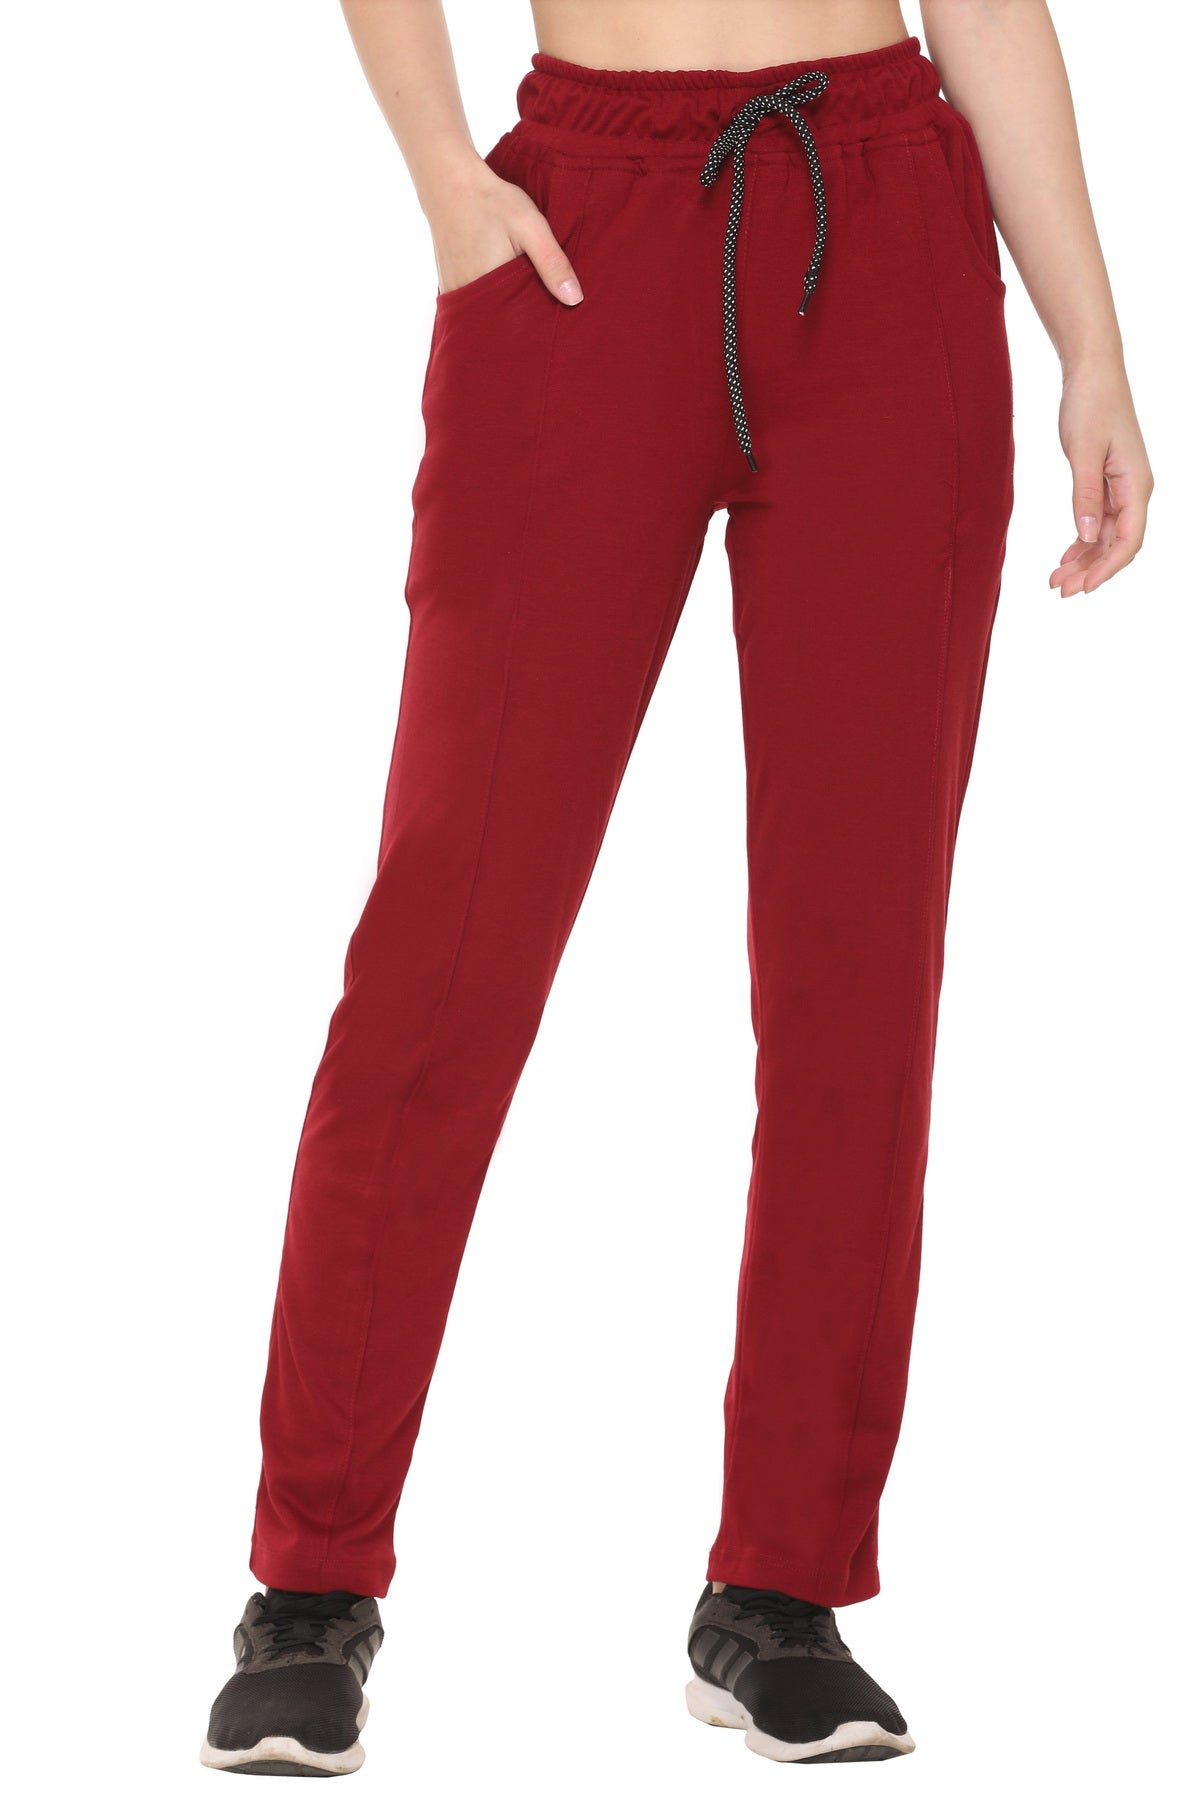 Cotton Running Track Pant with Zipper Pockets for Women  Laasa Sports